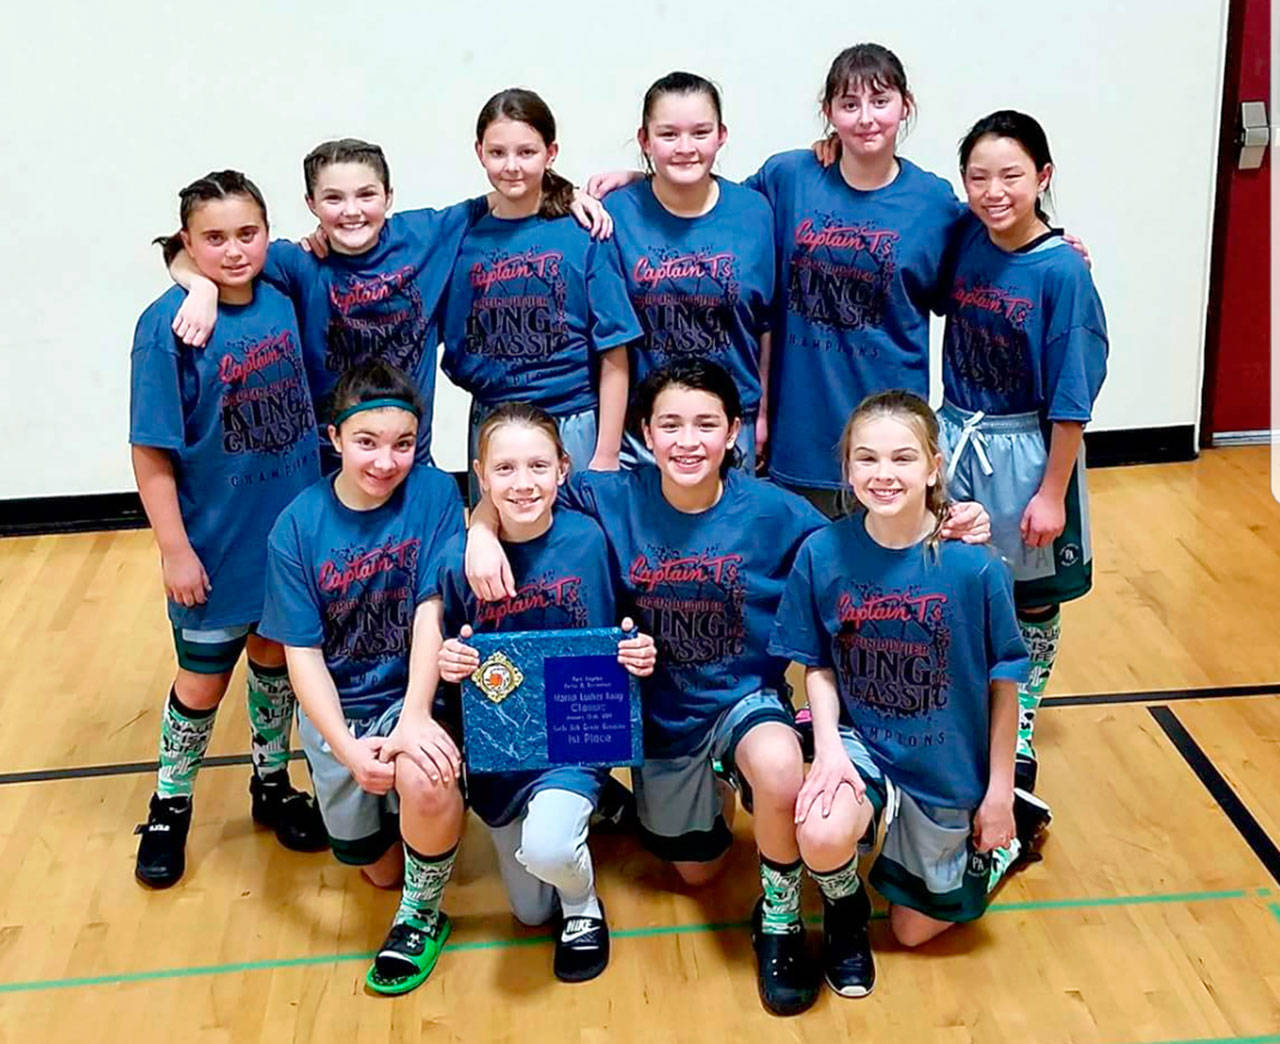 The 6th Grade Threat Port Angeles AAU basketball team went 4-0 last weekend at the Captain T’s Martin Luther King Tournament, defeating Bainbridge Roots 31-18 in the title game. The team is 9-3 on the season and opened league play this weekend in Poulsbo. Team members are, top row, from left, Makenna Larson, Keira Gedelman, Waverly Mead, Clarissa Sprague, Ella Hollis and Dylan Baermann. Front row, Lilly Scheid, Isabelle Felton, Ciara Cargo-Acosta and Vienna Shamp.